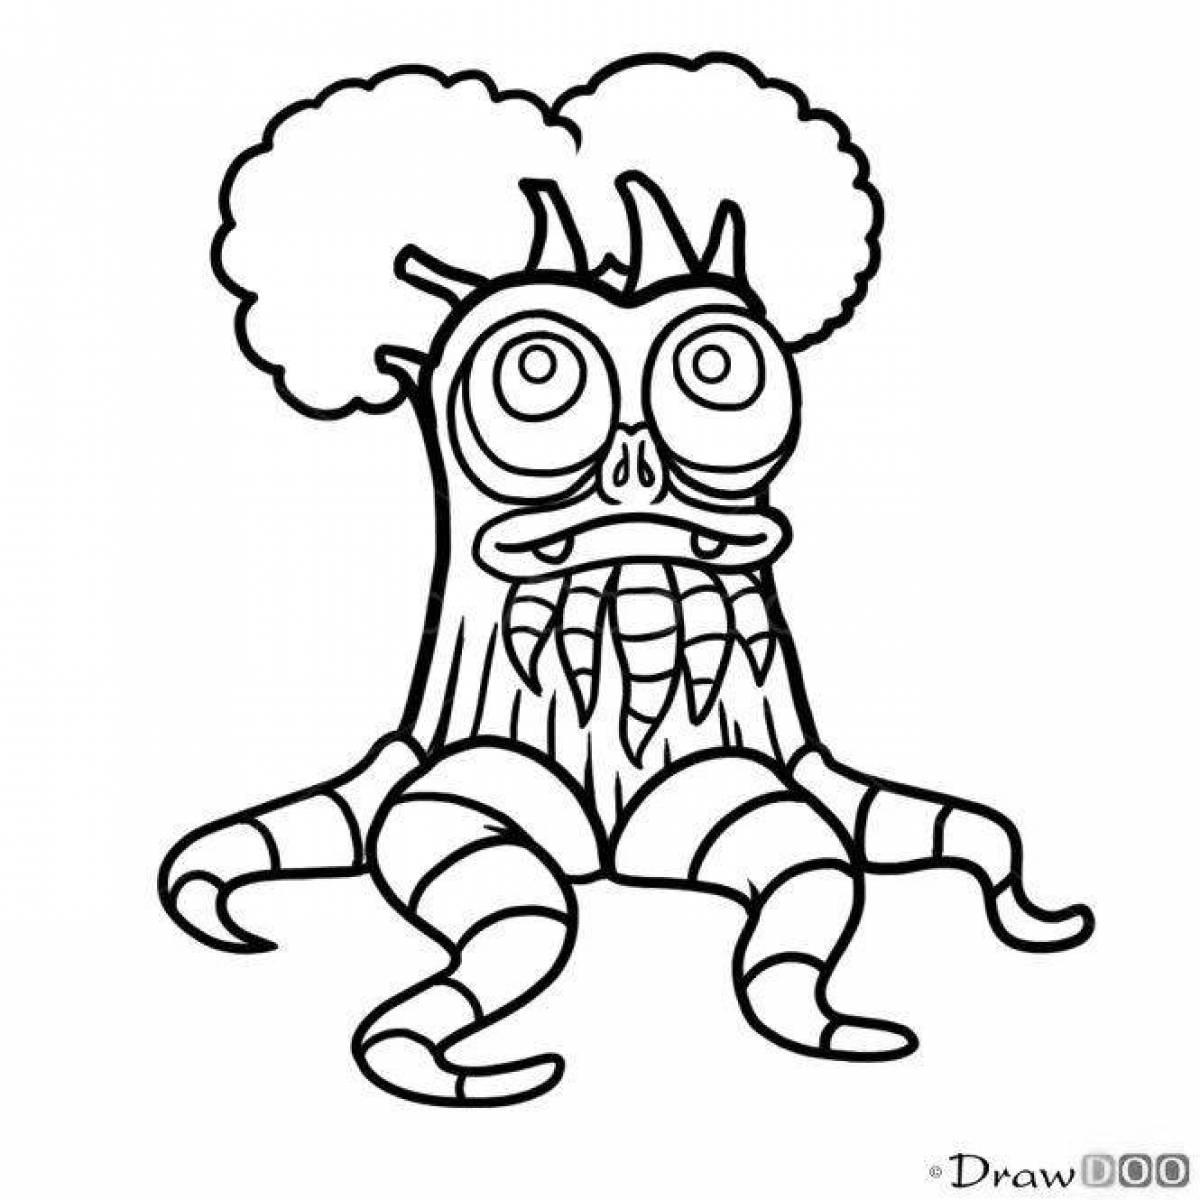 Exquisite singing monster coloring pages for kids